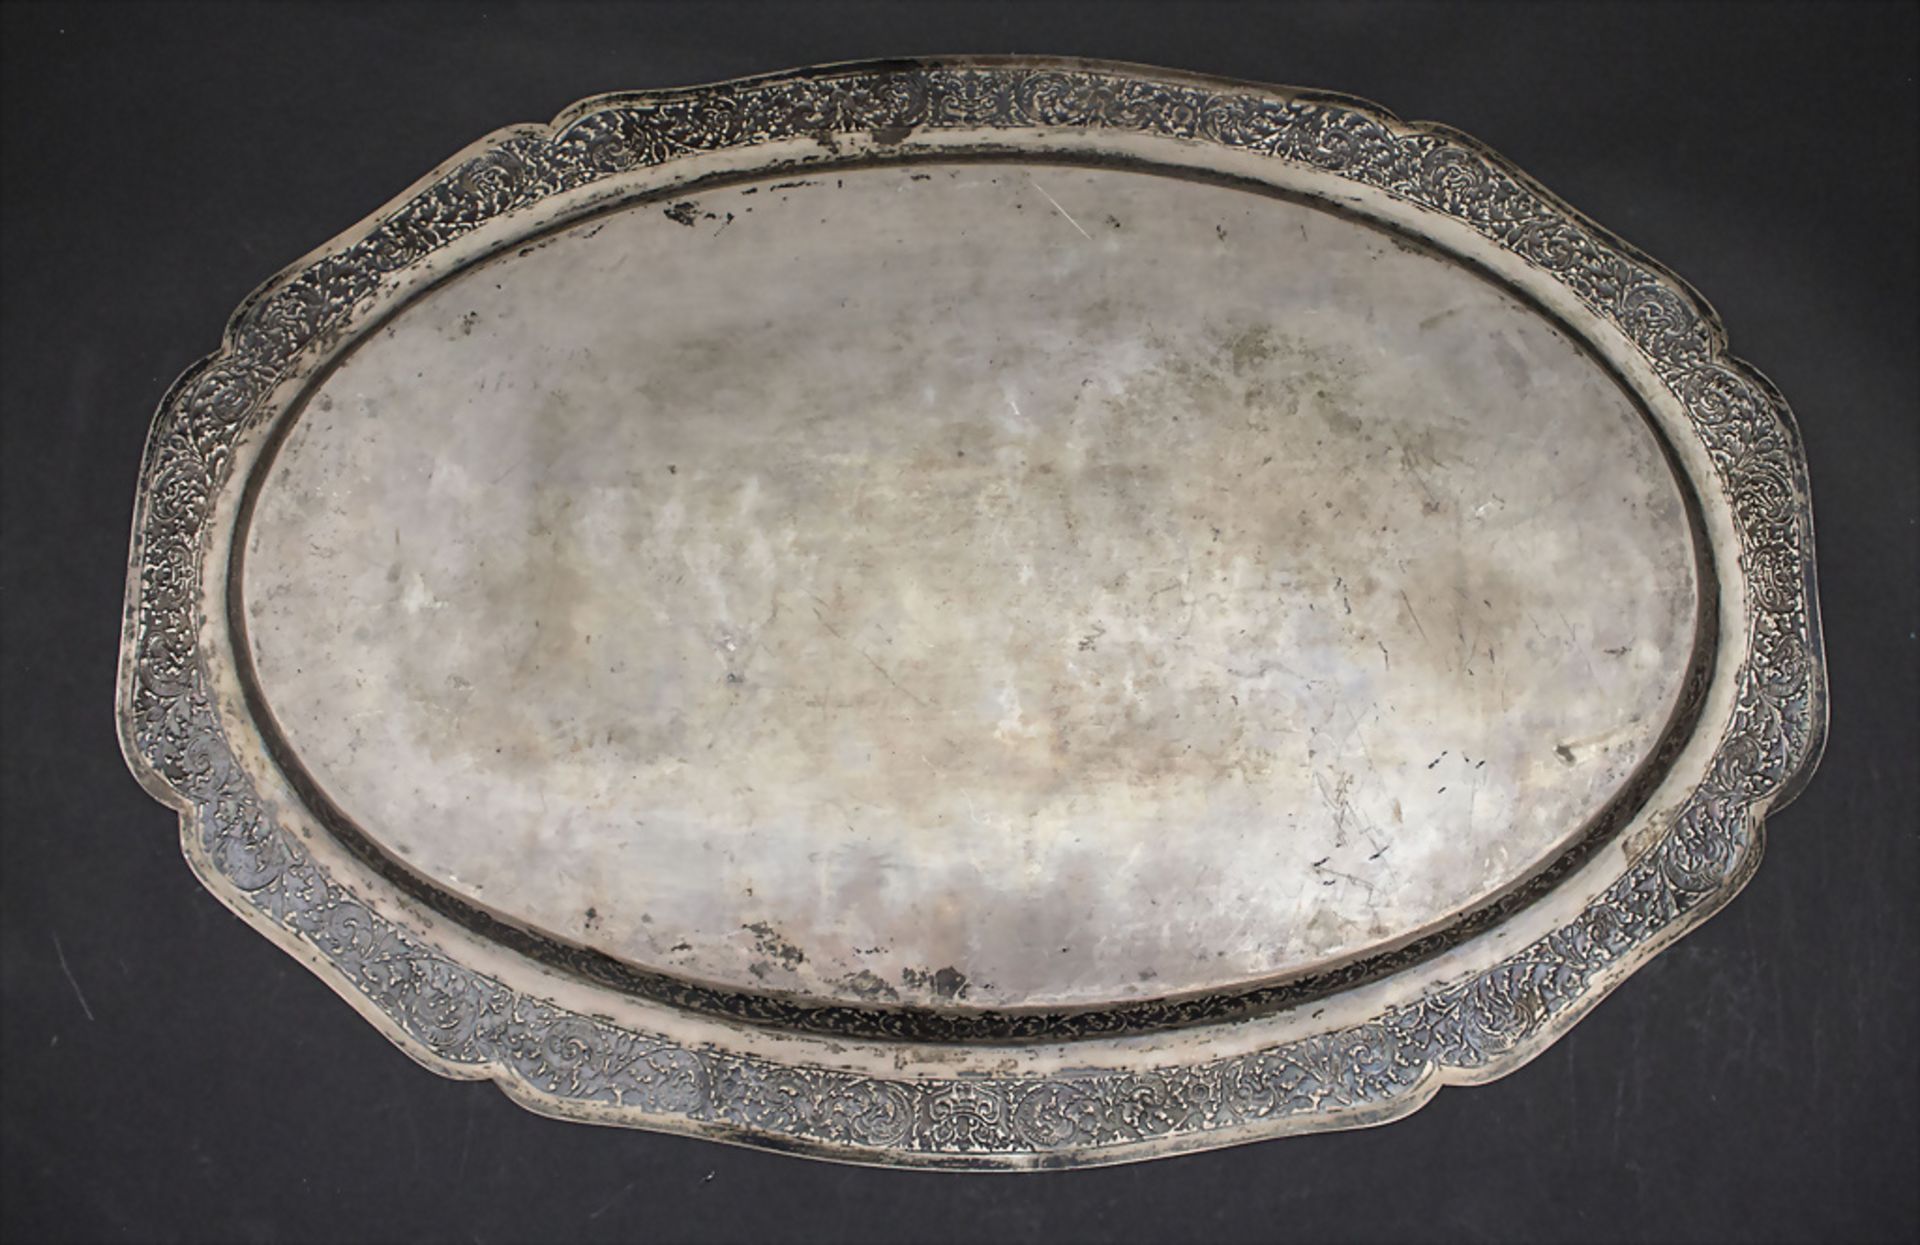 Tee-Tablett / A large silver tray, Kambodscha/Cambodia, 20. Jh. - Image 2 of 3